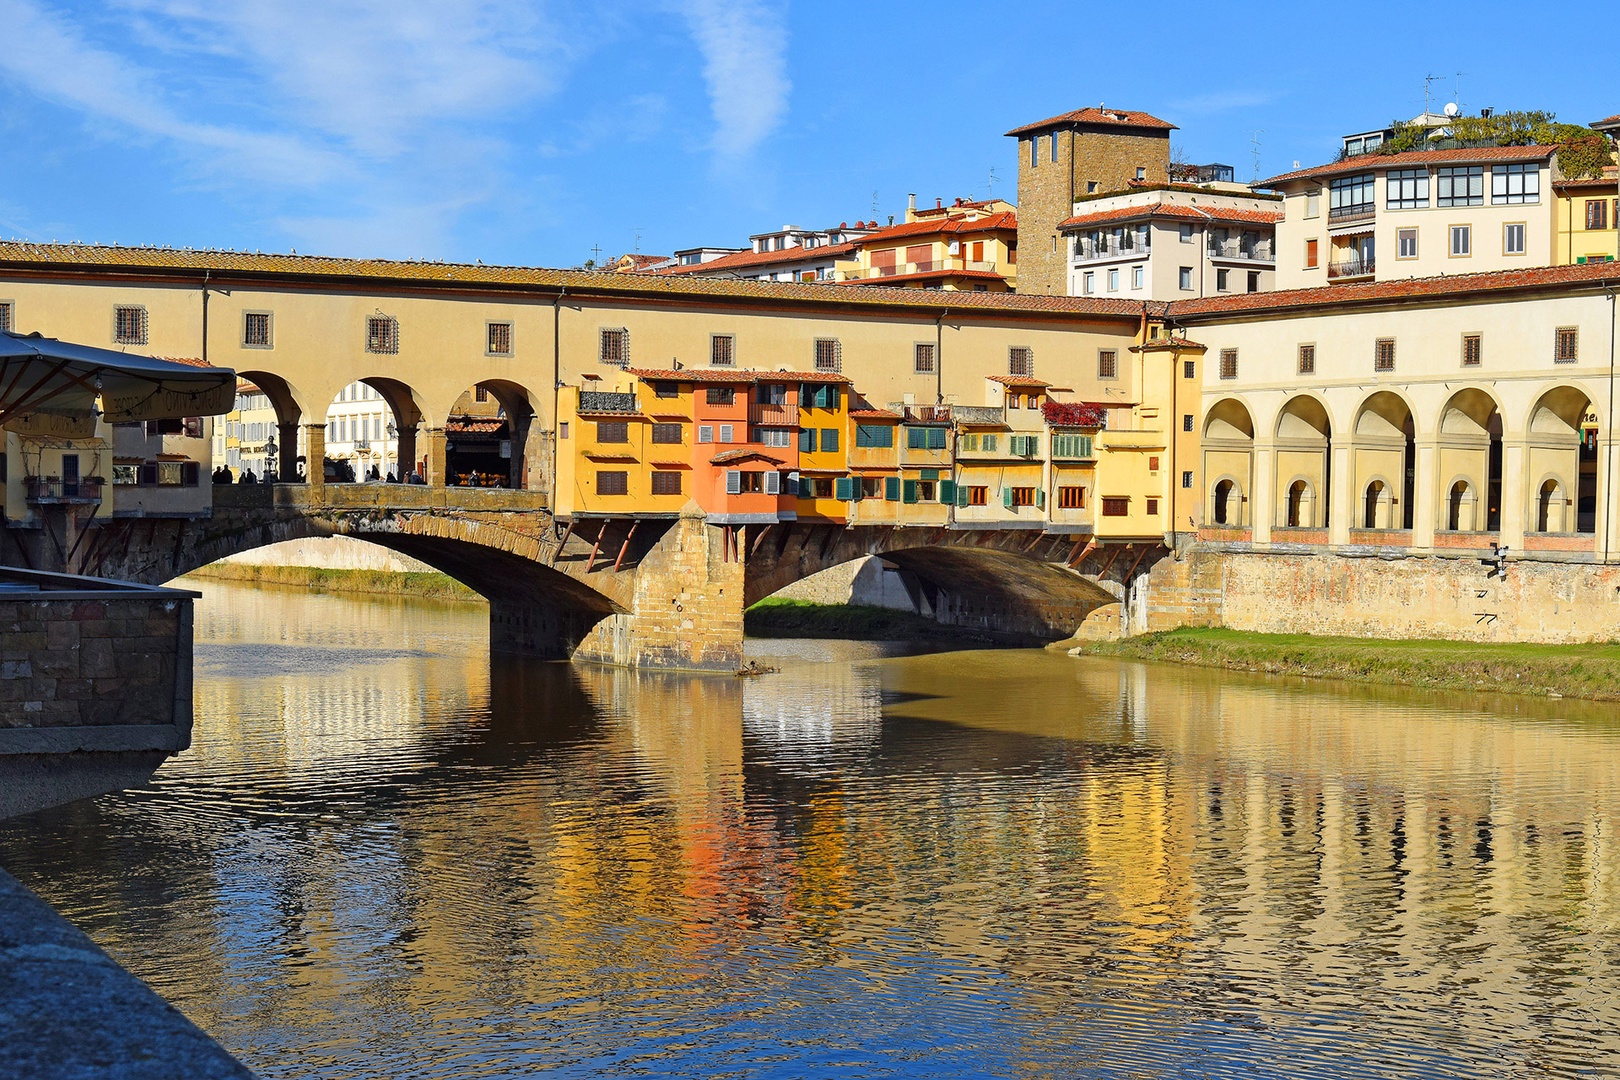 The Ponte Vecchio has graced the Arno river for 700 years. Fine jewelery shops adorn your stroll.